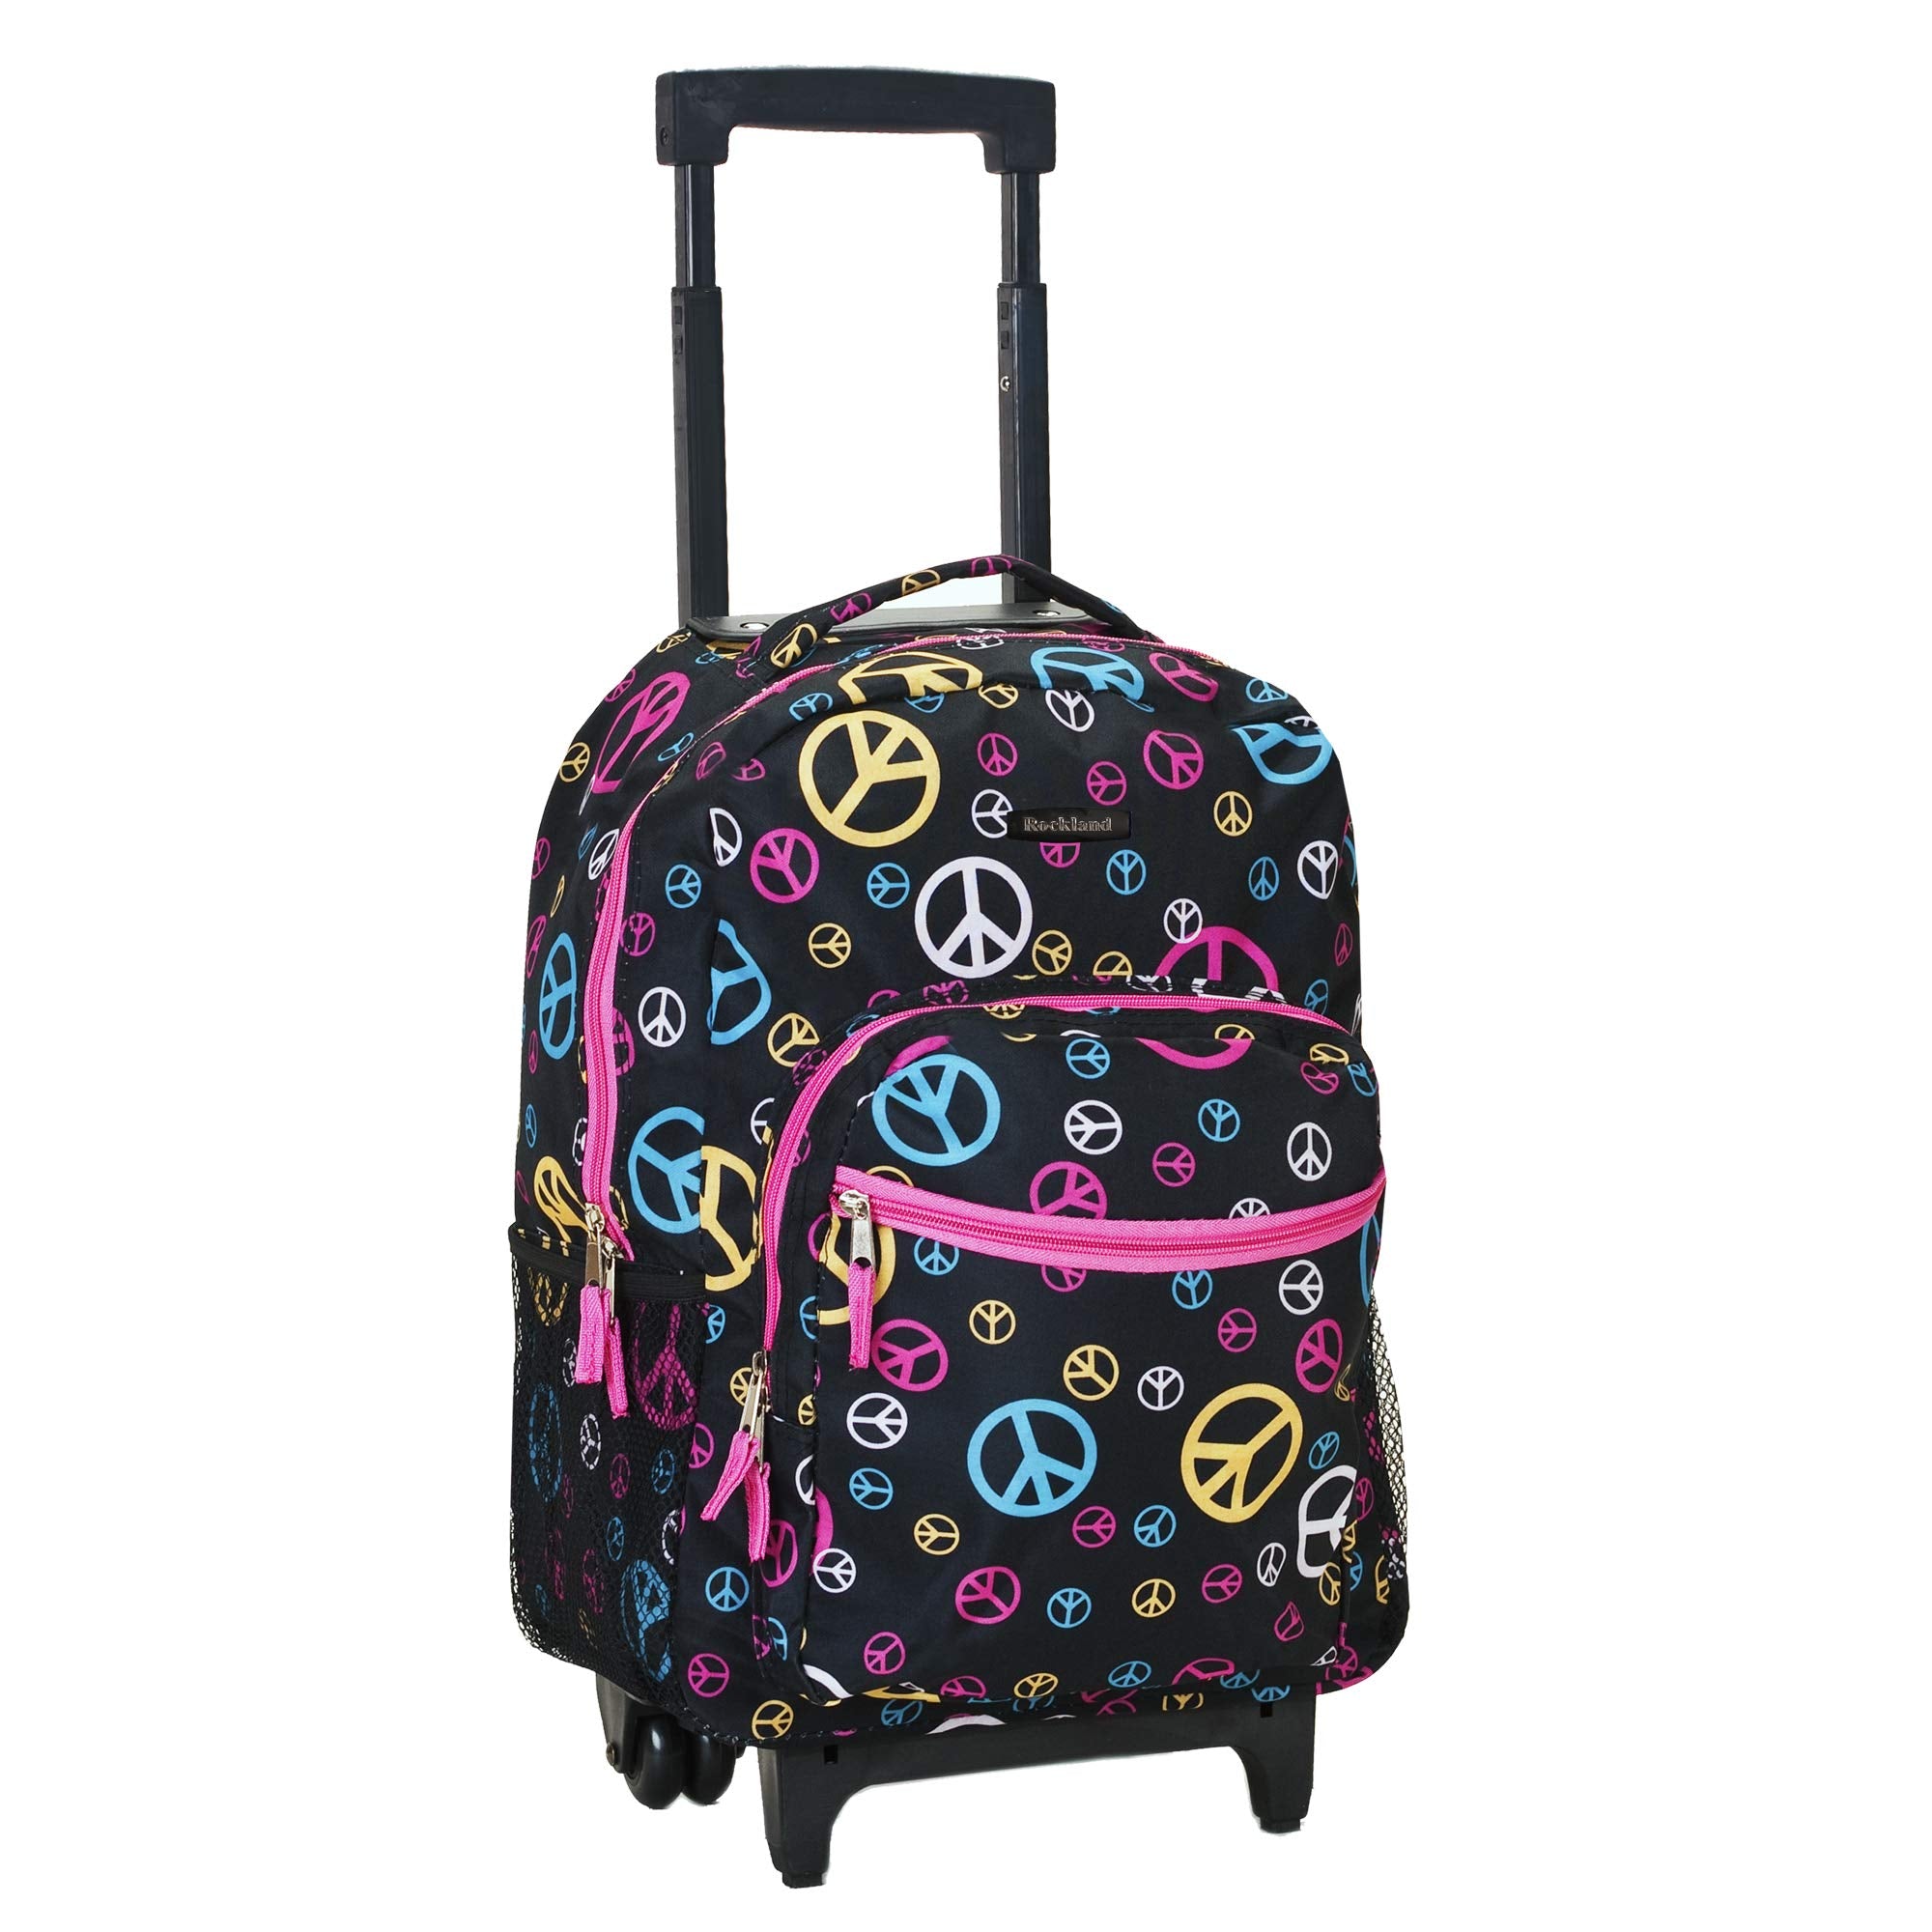 Rockland Luggage 17 Inch Rolling Backpack, Peace, Medium ...